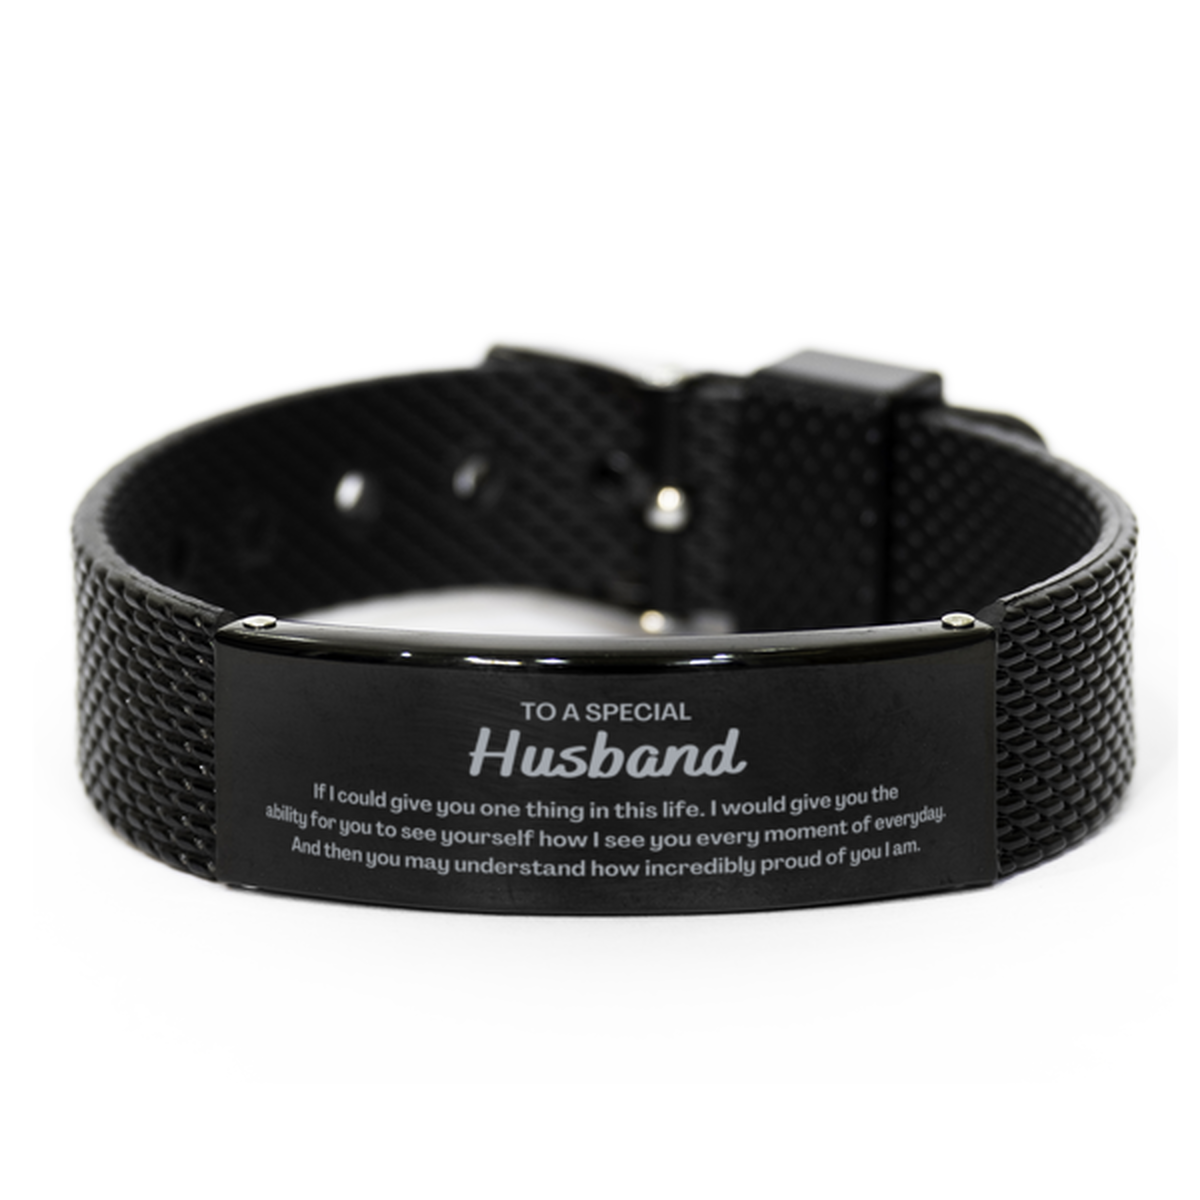 To My Husband Black Shark Mesh Bracelet, Gifts For Husband Engraved, Inspirational Gifts for Christmas Birthday, Epic Gifts for Husband To A Special Husband how incredibly proud of you I am